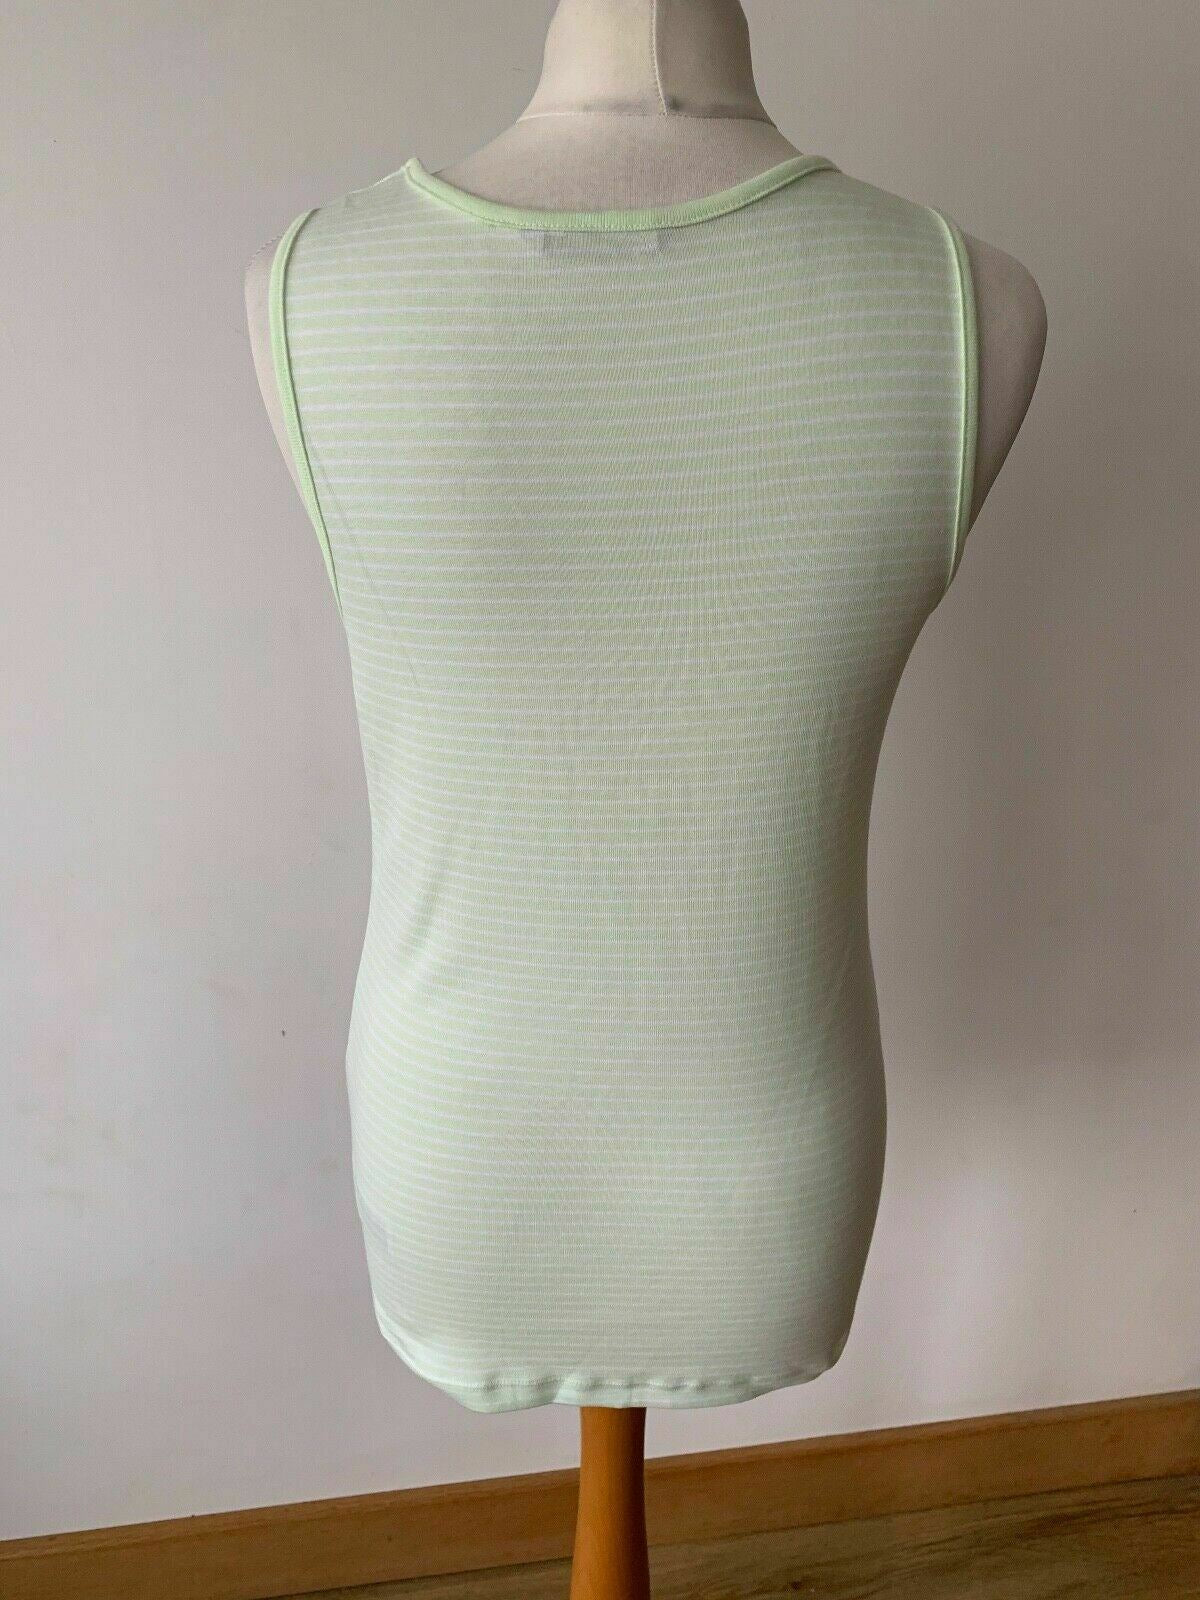 M&S Vest Cotton Top Lime Green Striped Sizes 14 and 16 available